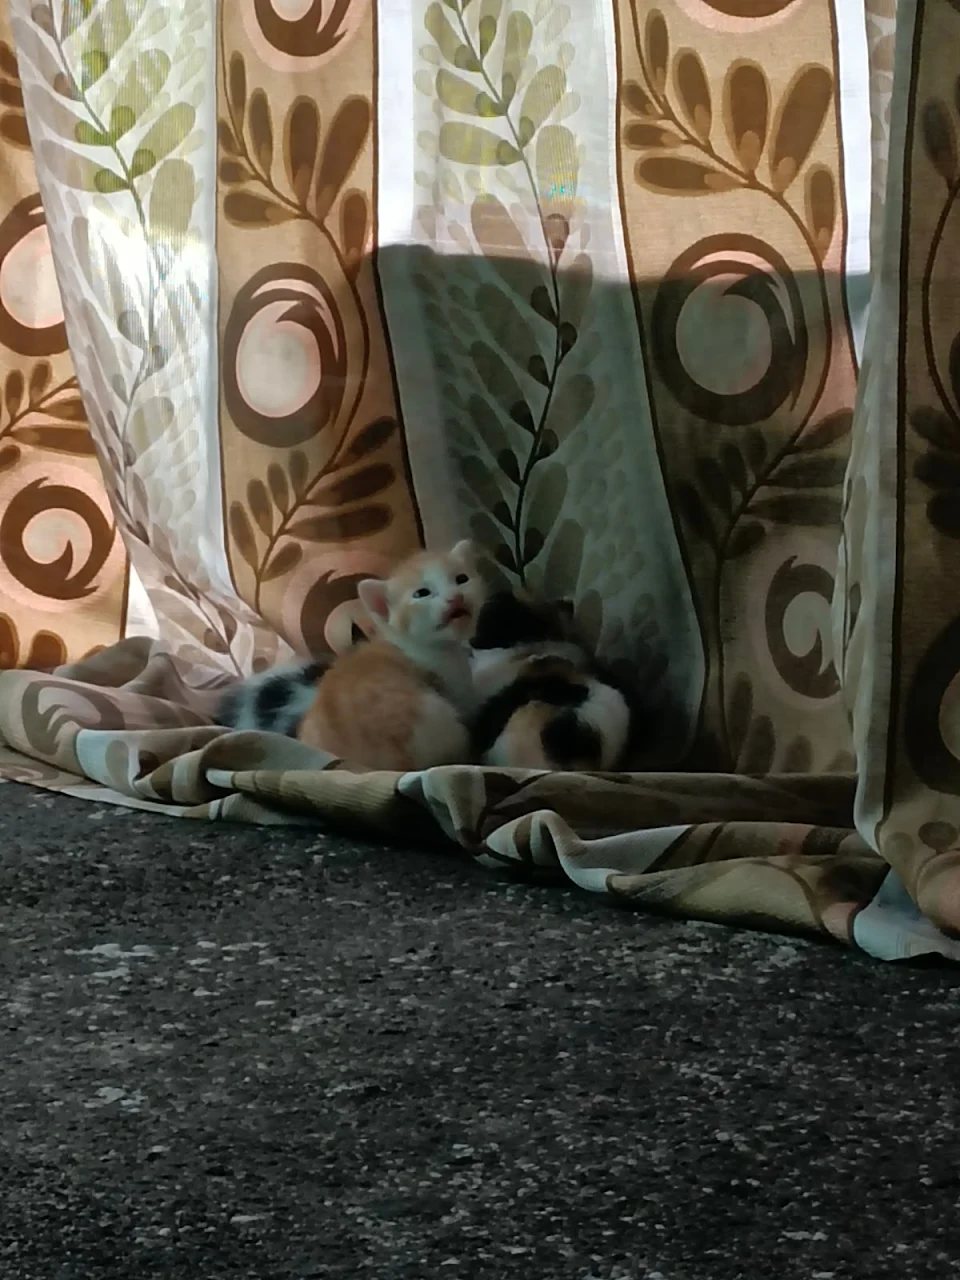 Found some kittens on my house terrace, What should I do?